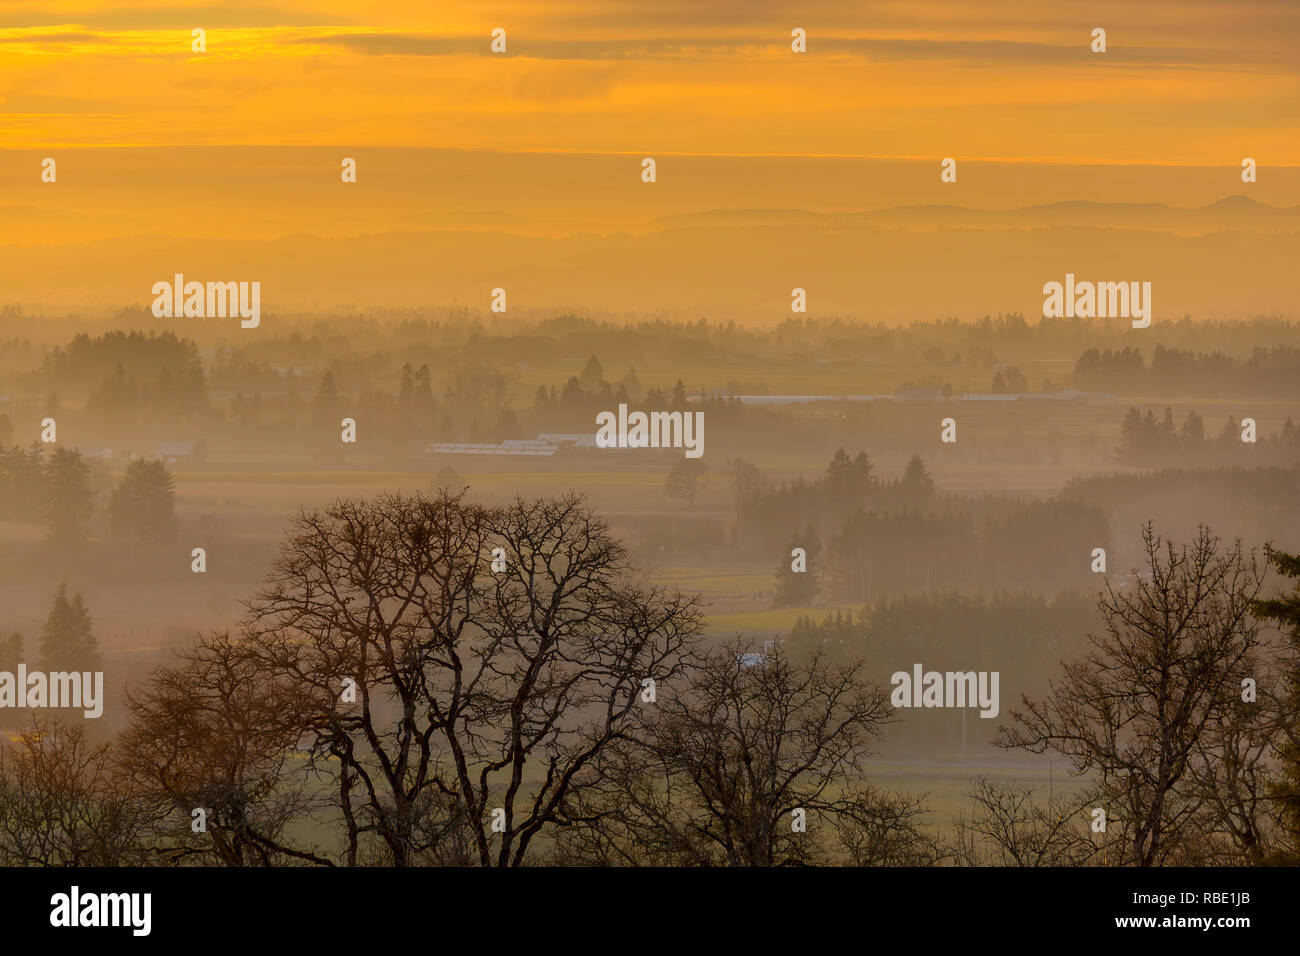 Golden sunset over farmland in rural Oregon during winter Stock Photo